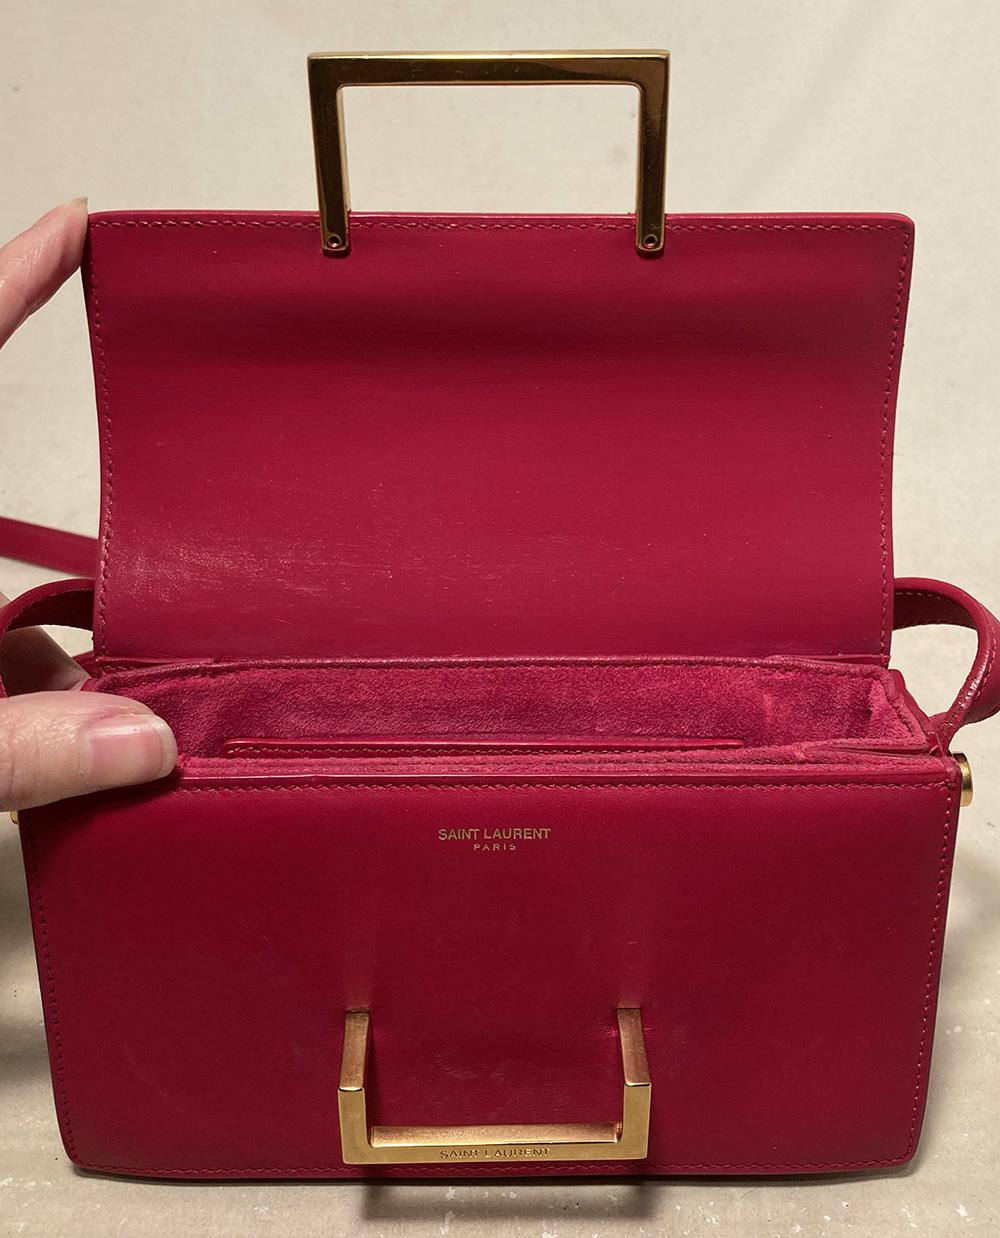 Yves Saint Laurent Pink Leather Small Lulu Bag In Excellent Condition For Sale In Philadelphia, PA